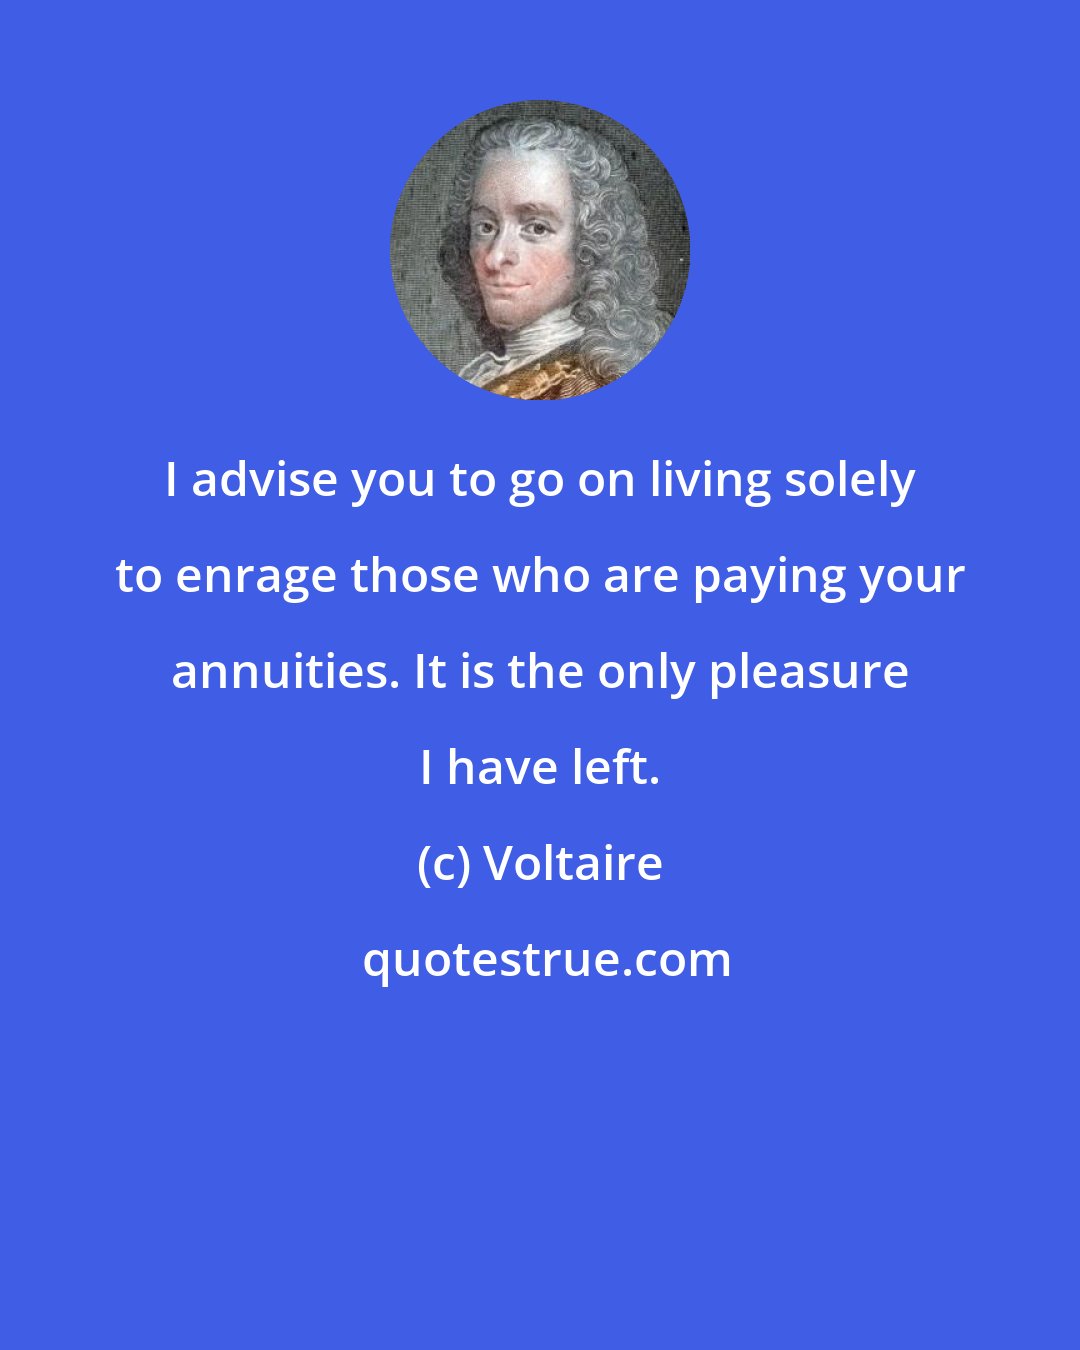 Voltaire: I advise you to go on living solely to enrage those who are paying your annuities. It is the only pleasure I have left.